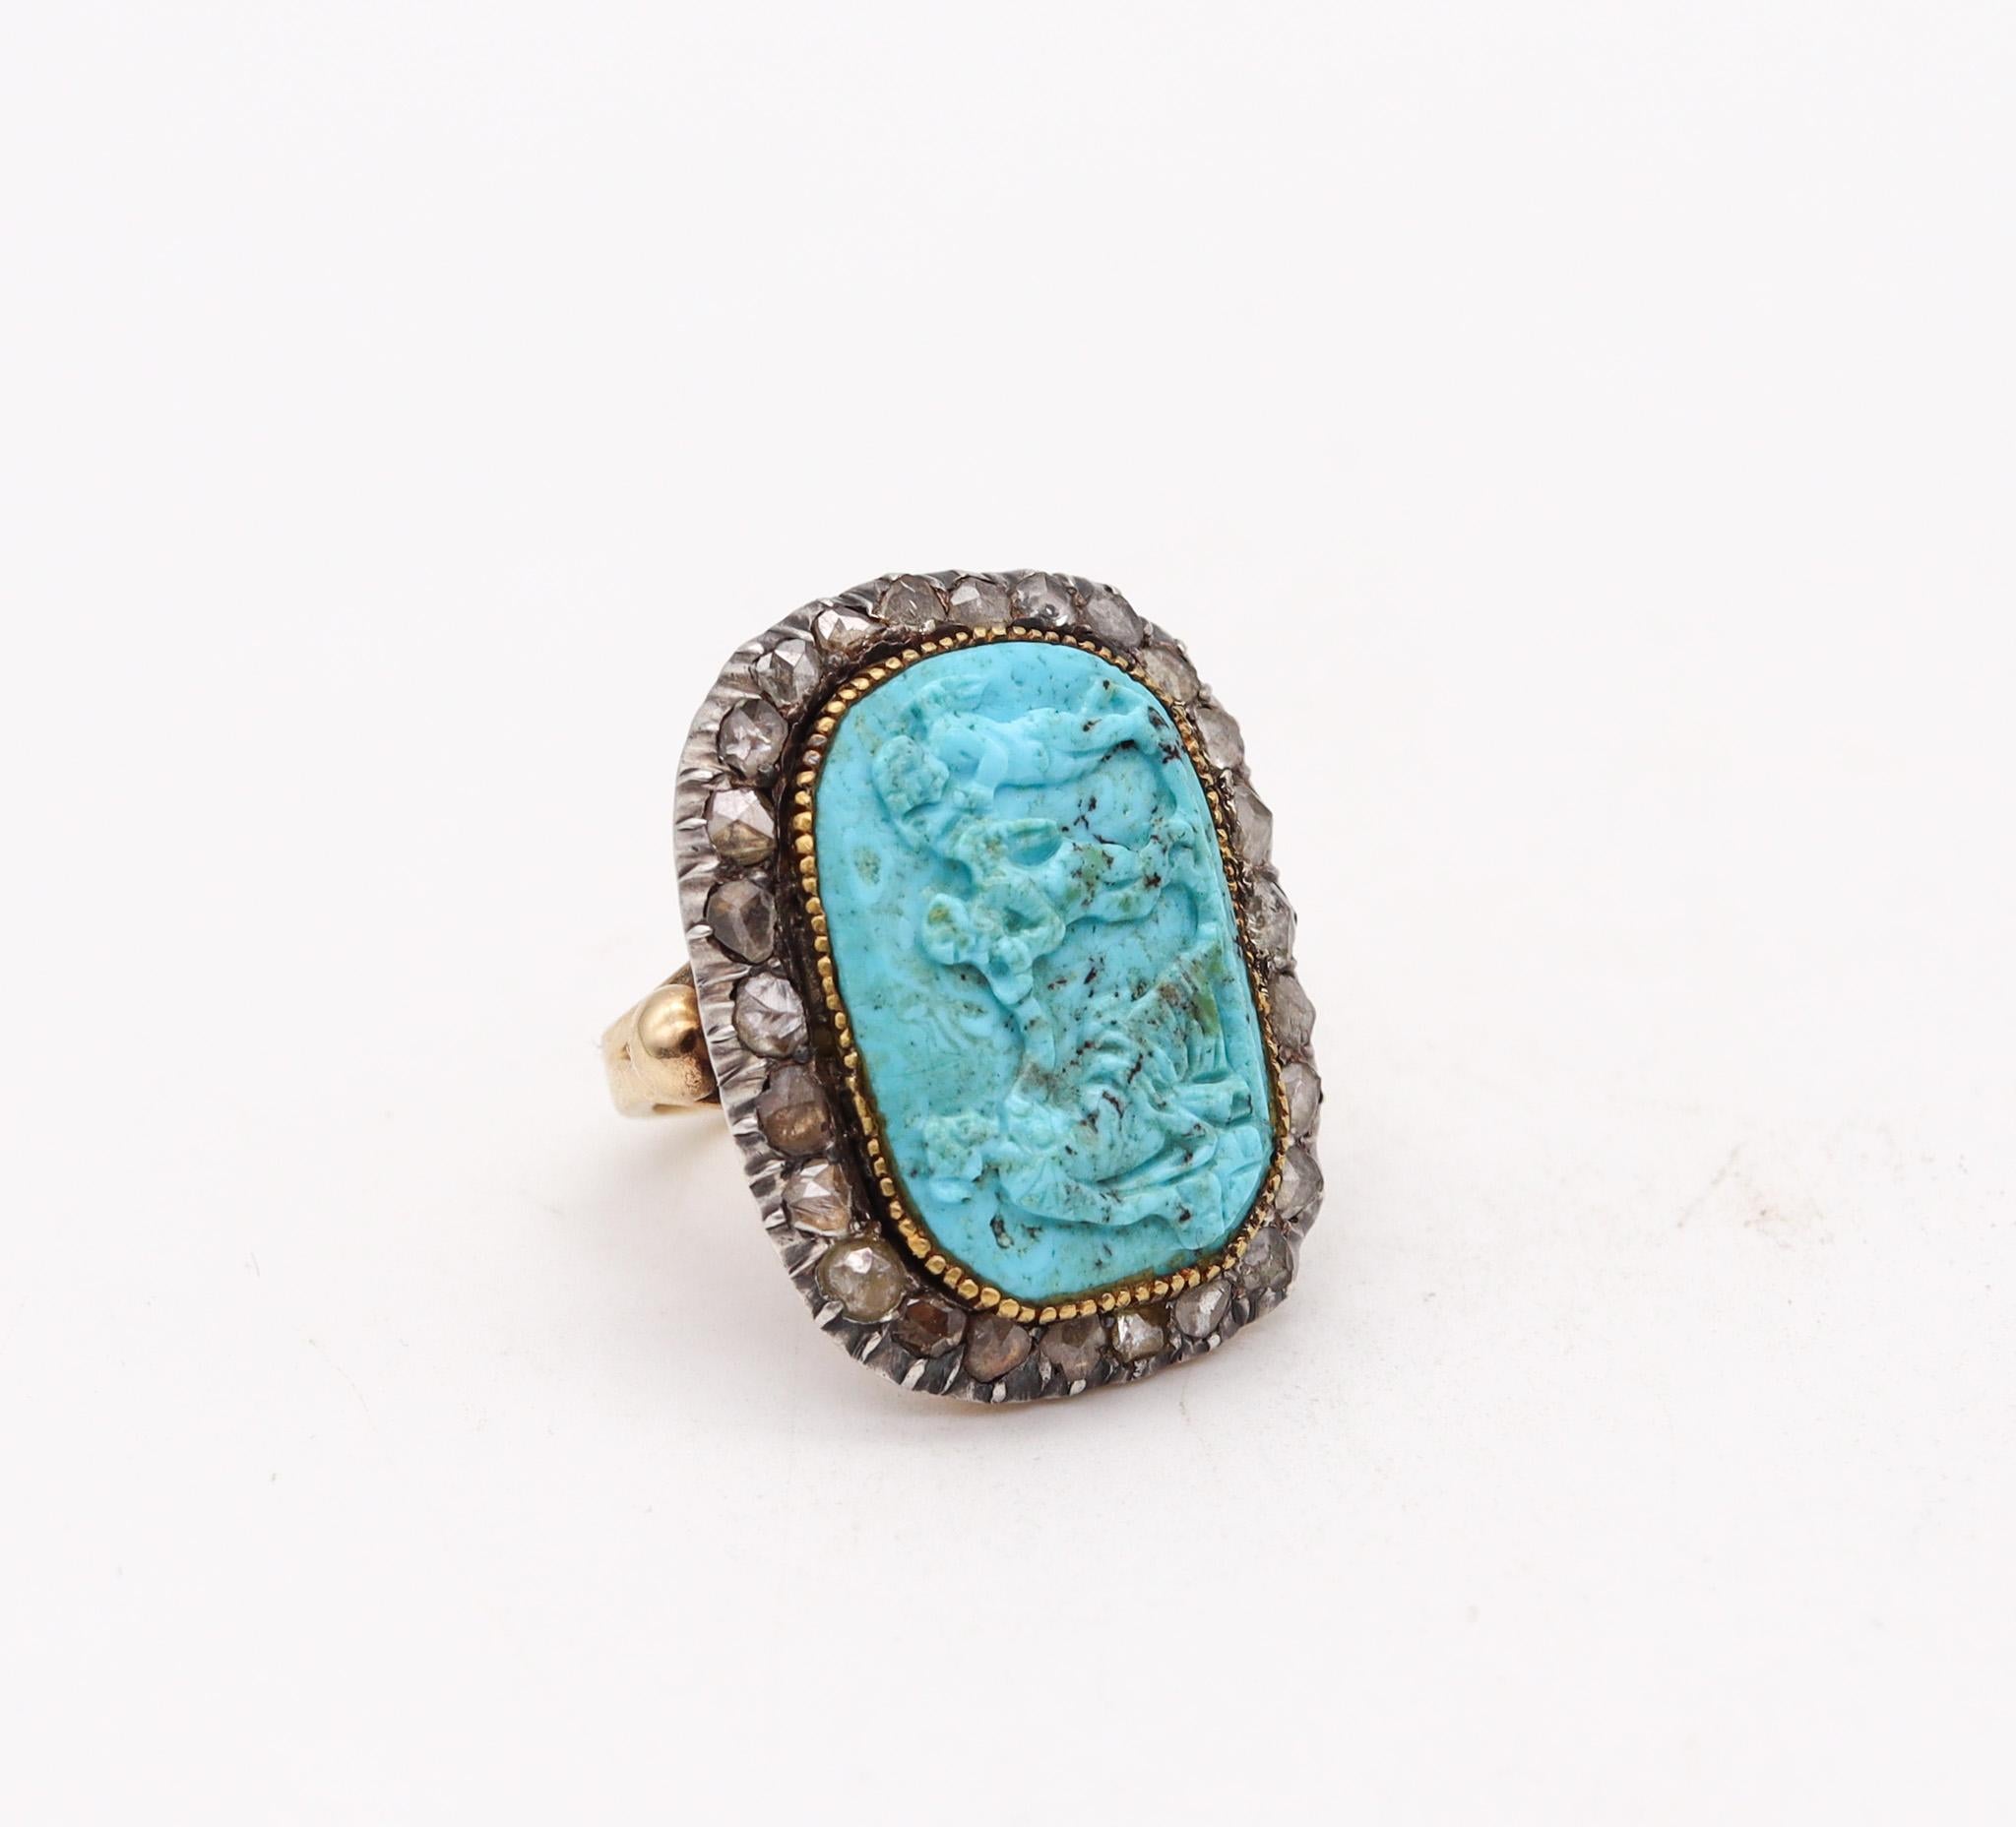 Antique 18th century georgian ring with mythological scene.

Gorgeous piece of art, created in England back in the 18th century, circa 1780 during the British Georgian period. This rare ring was carefully crafted with beautiful mythological motifs